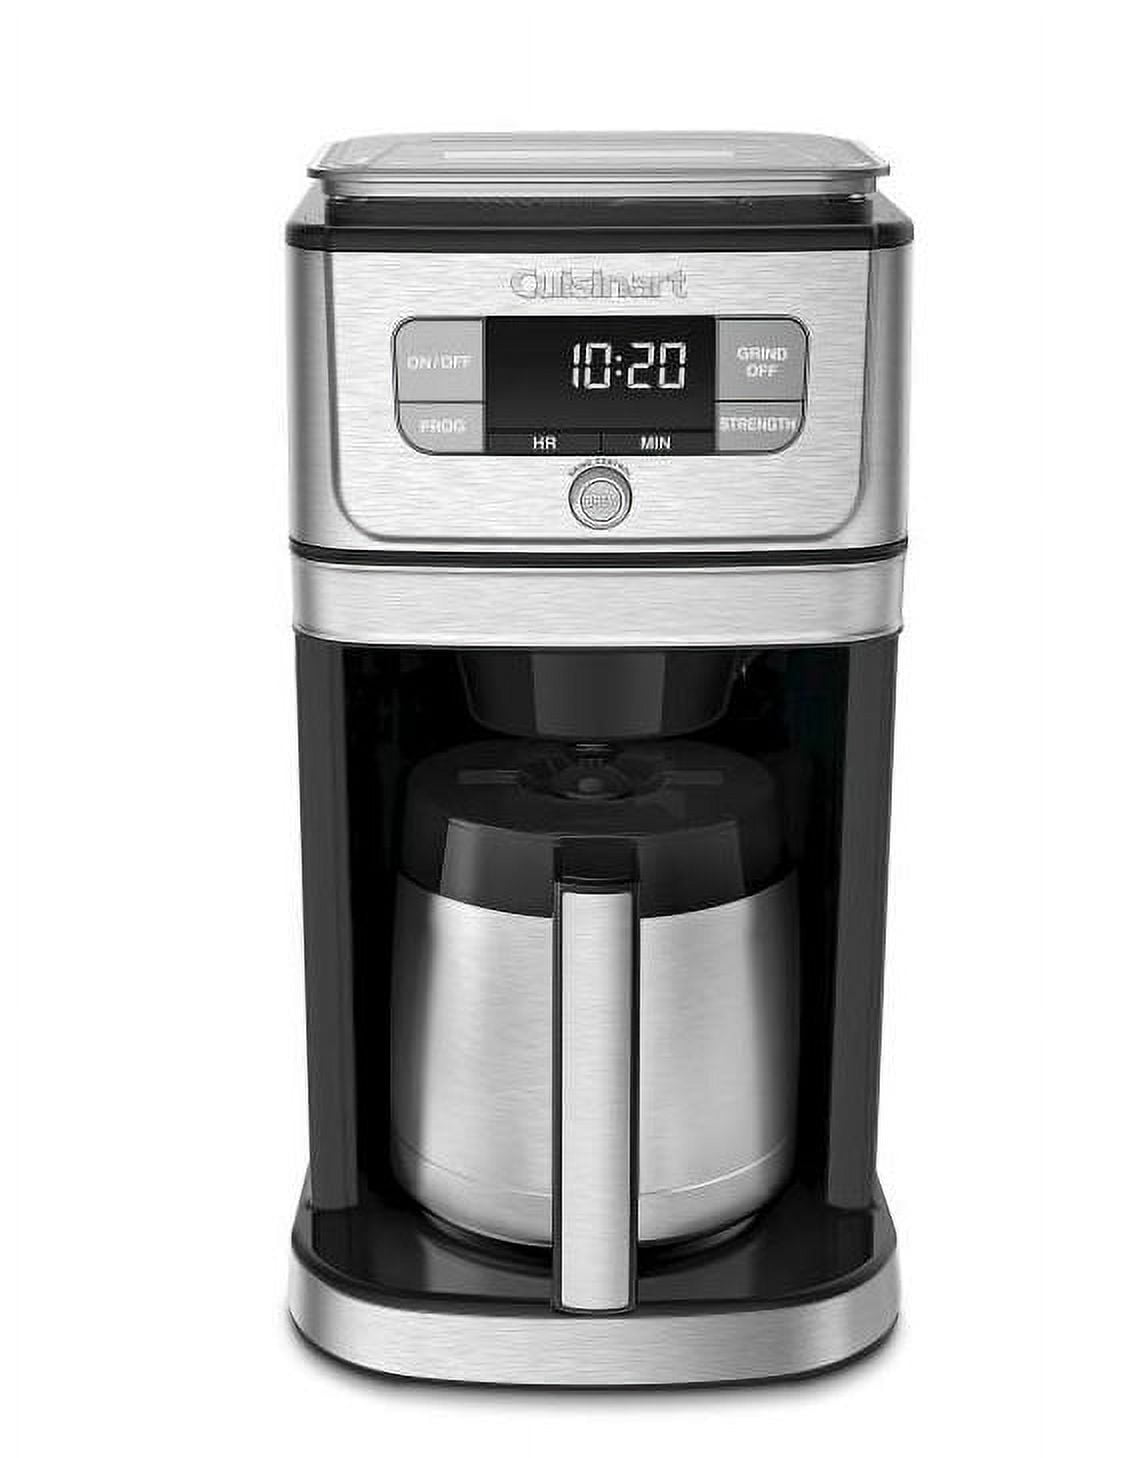  Cuisinart 10 Cup Coffee Maker with Grinder, Automatic Grind &  Brew, Black/Silver, DGB-450: Home & Kitchen